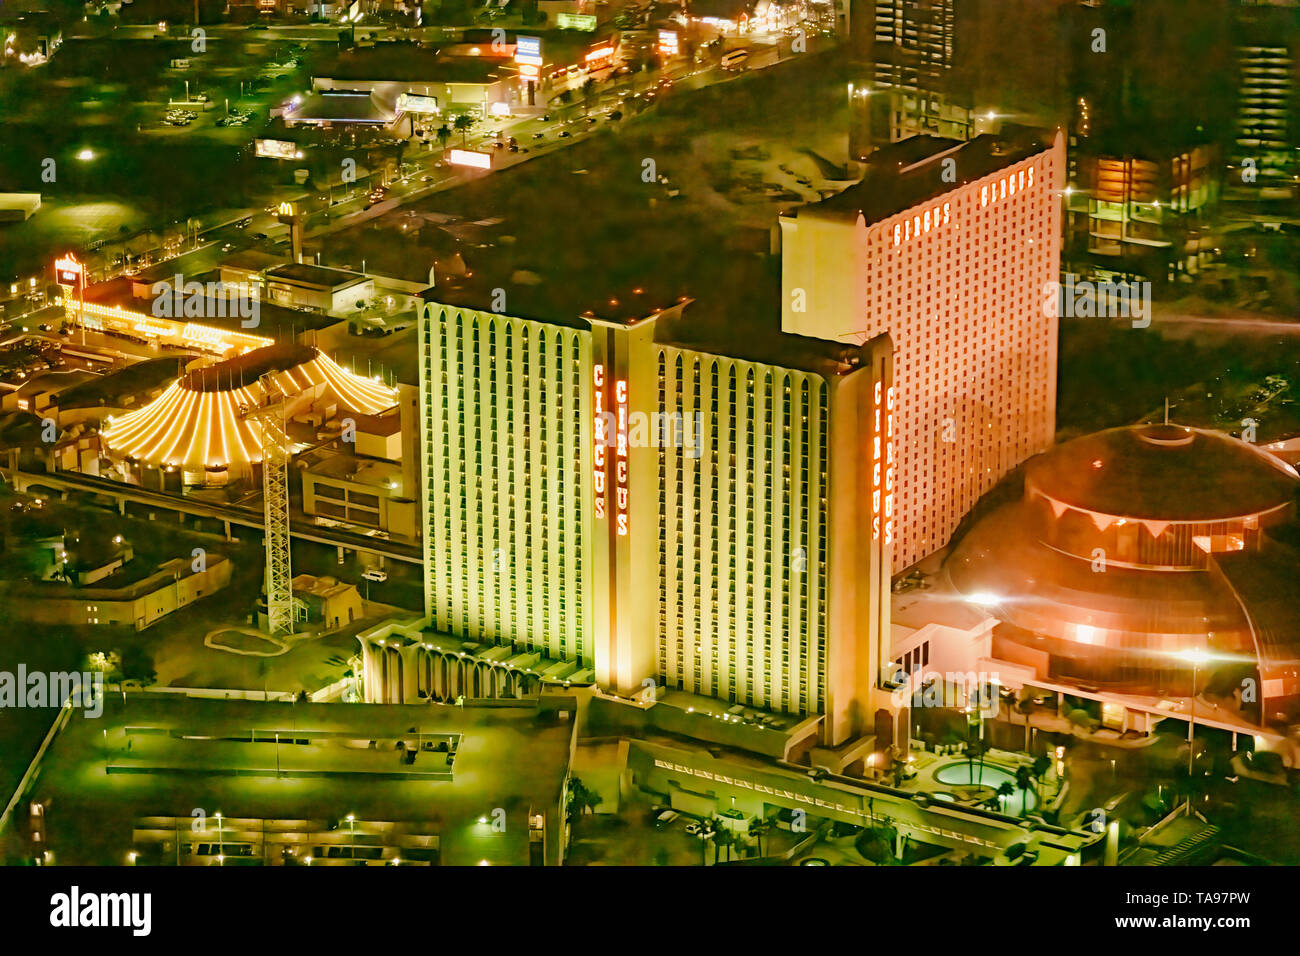 LAS VEGAS, NV - JUNE 29, 2018: Circus Circus Casino night aerial view. Las Vegas is known as the Sin City, City of Lights, Gambling Capital of the Wor Stock Photo